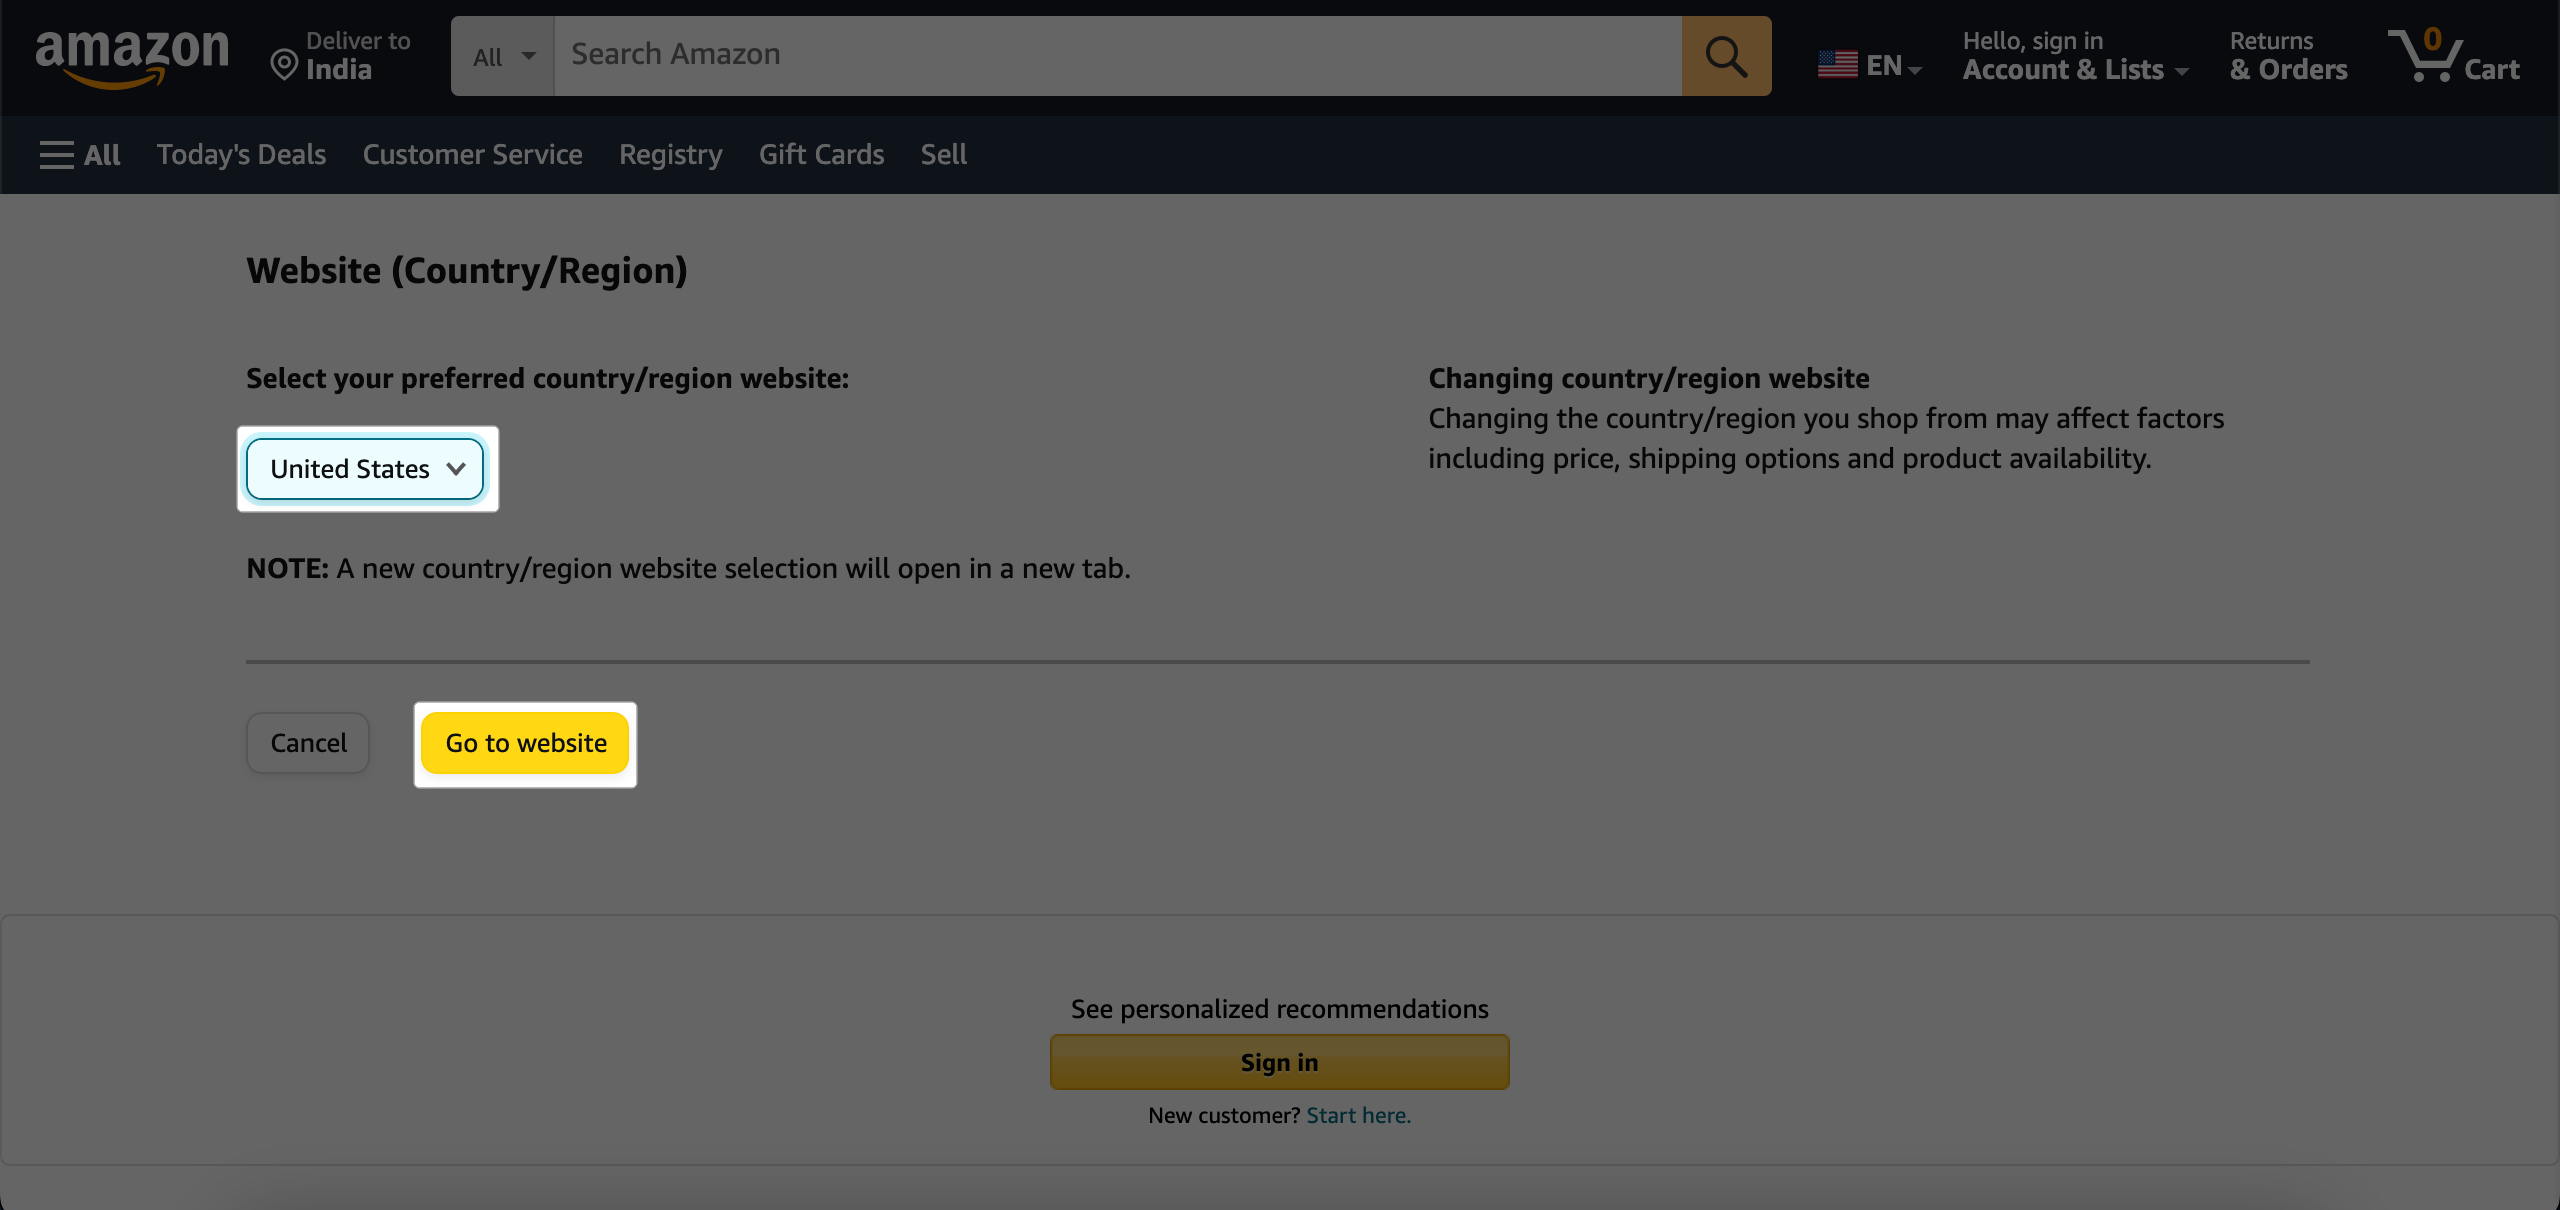 Select new country from drop down list then select Go to website to change amazon country